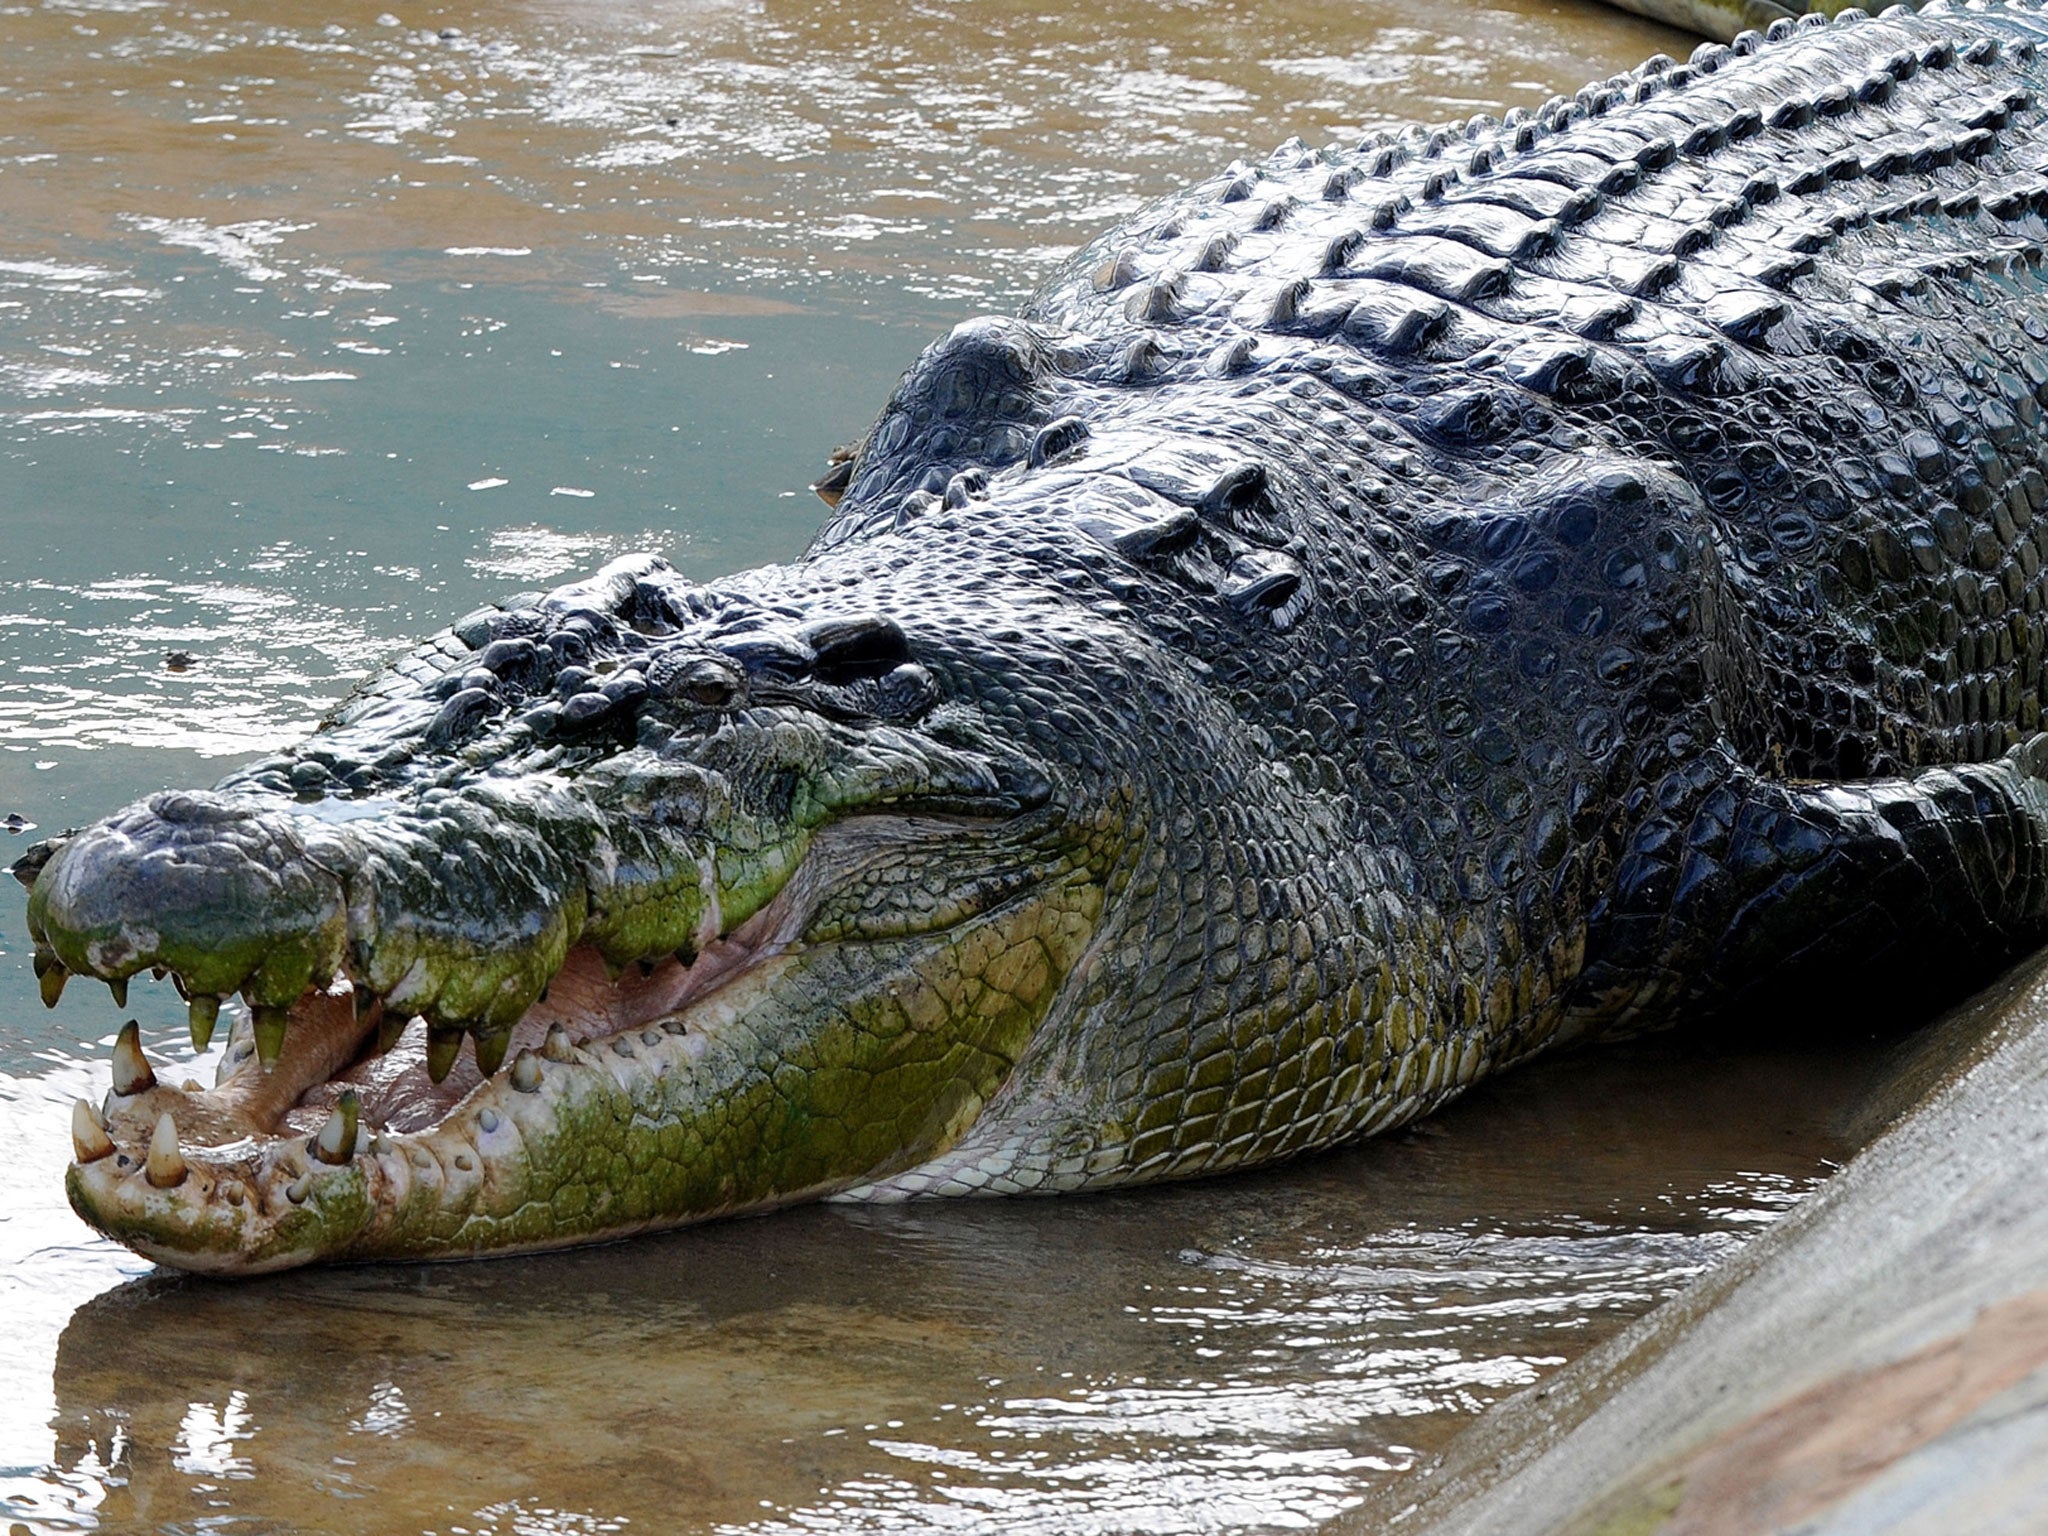 A crocodile in the Philippines.